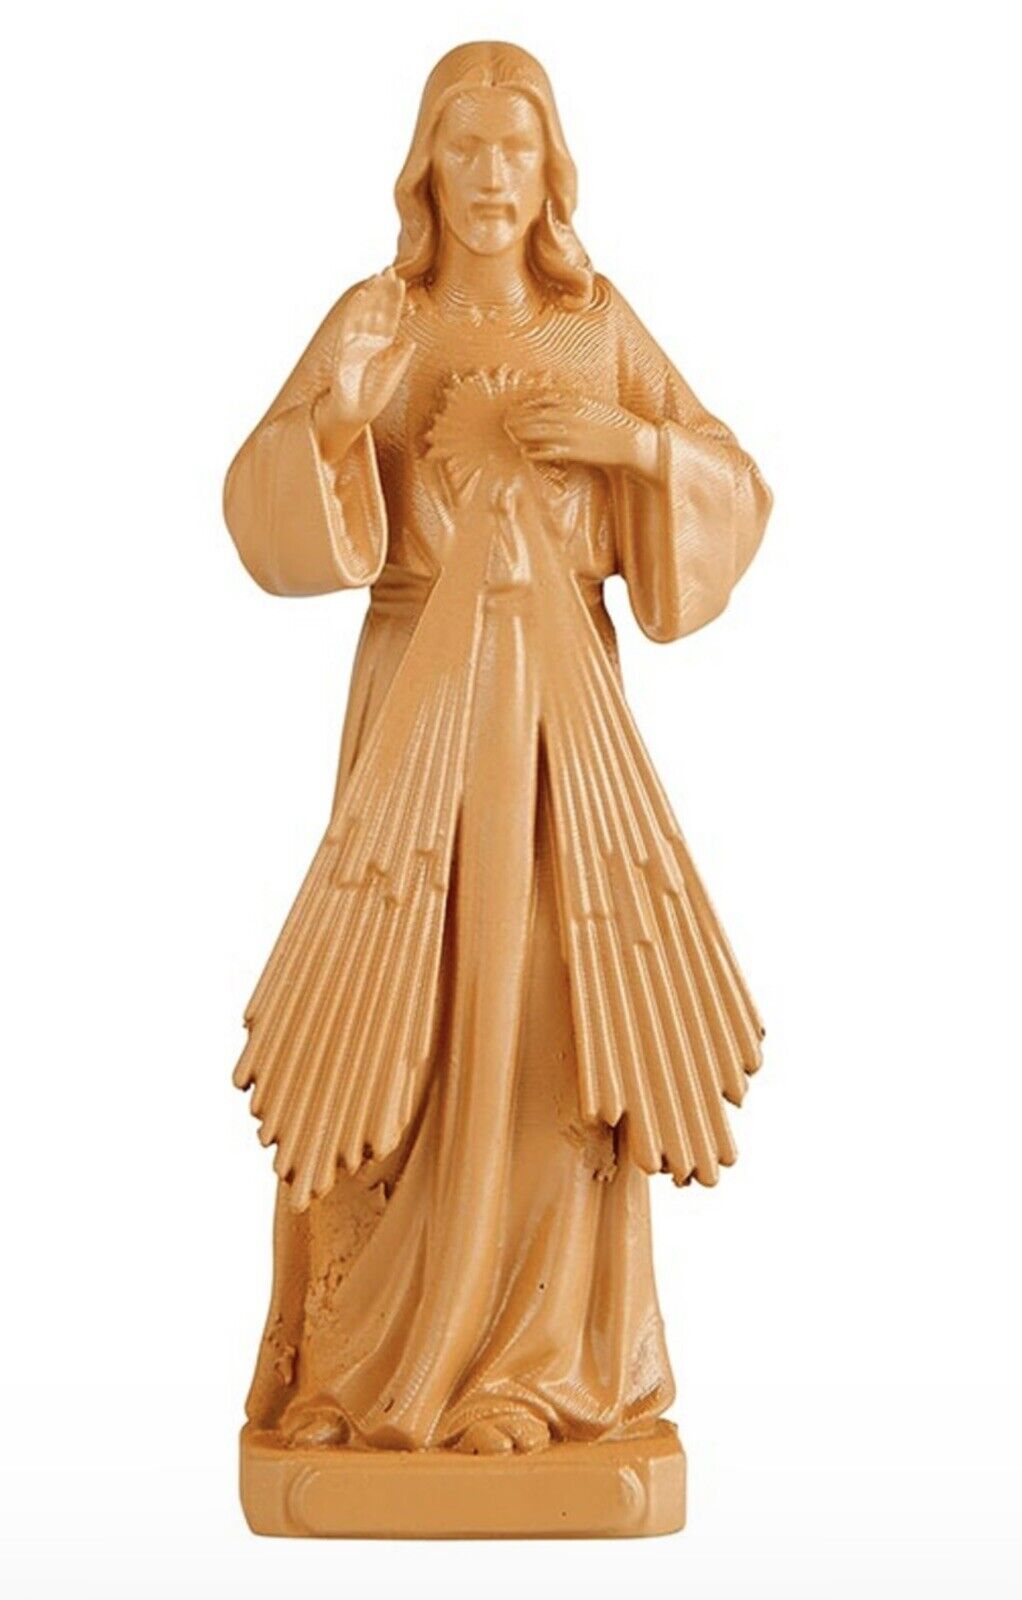 DIVINE MERCY LORD Jesus Christ VINTAGE TAN STATUE - 4” Resin Made Standing